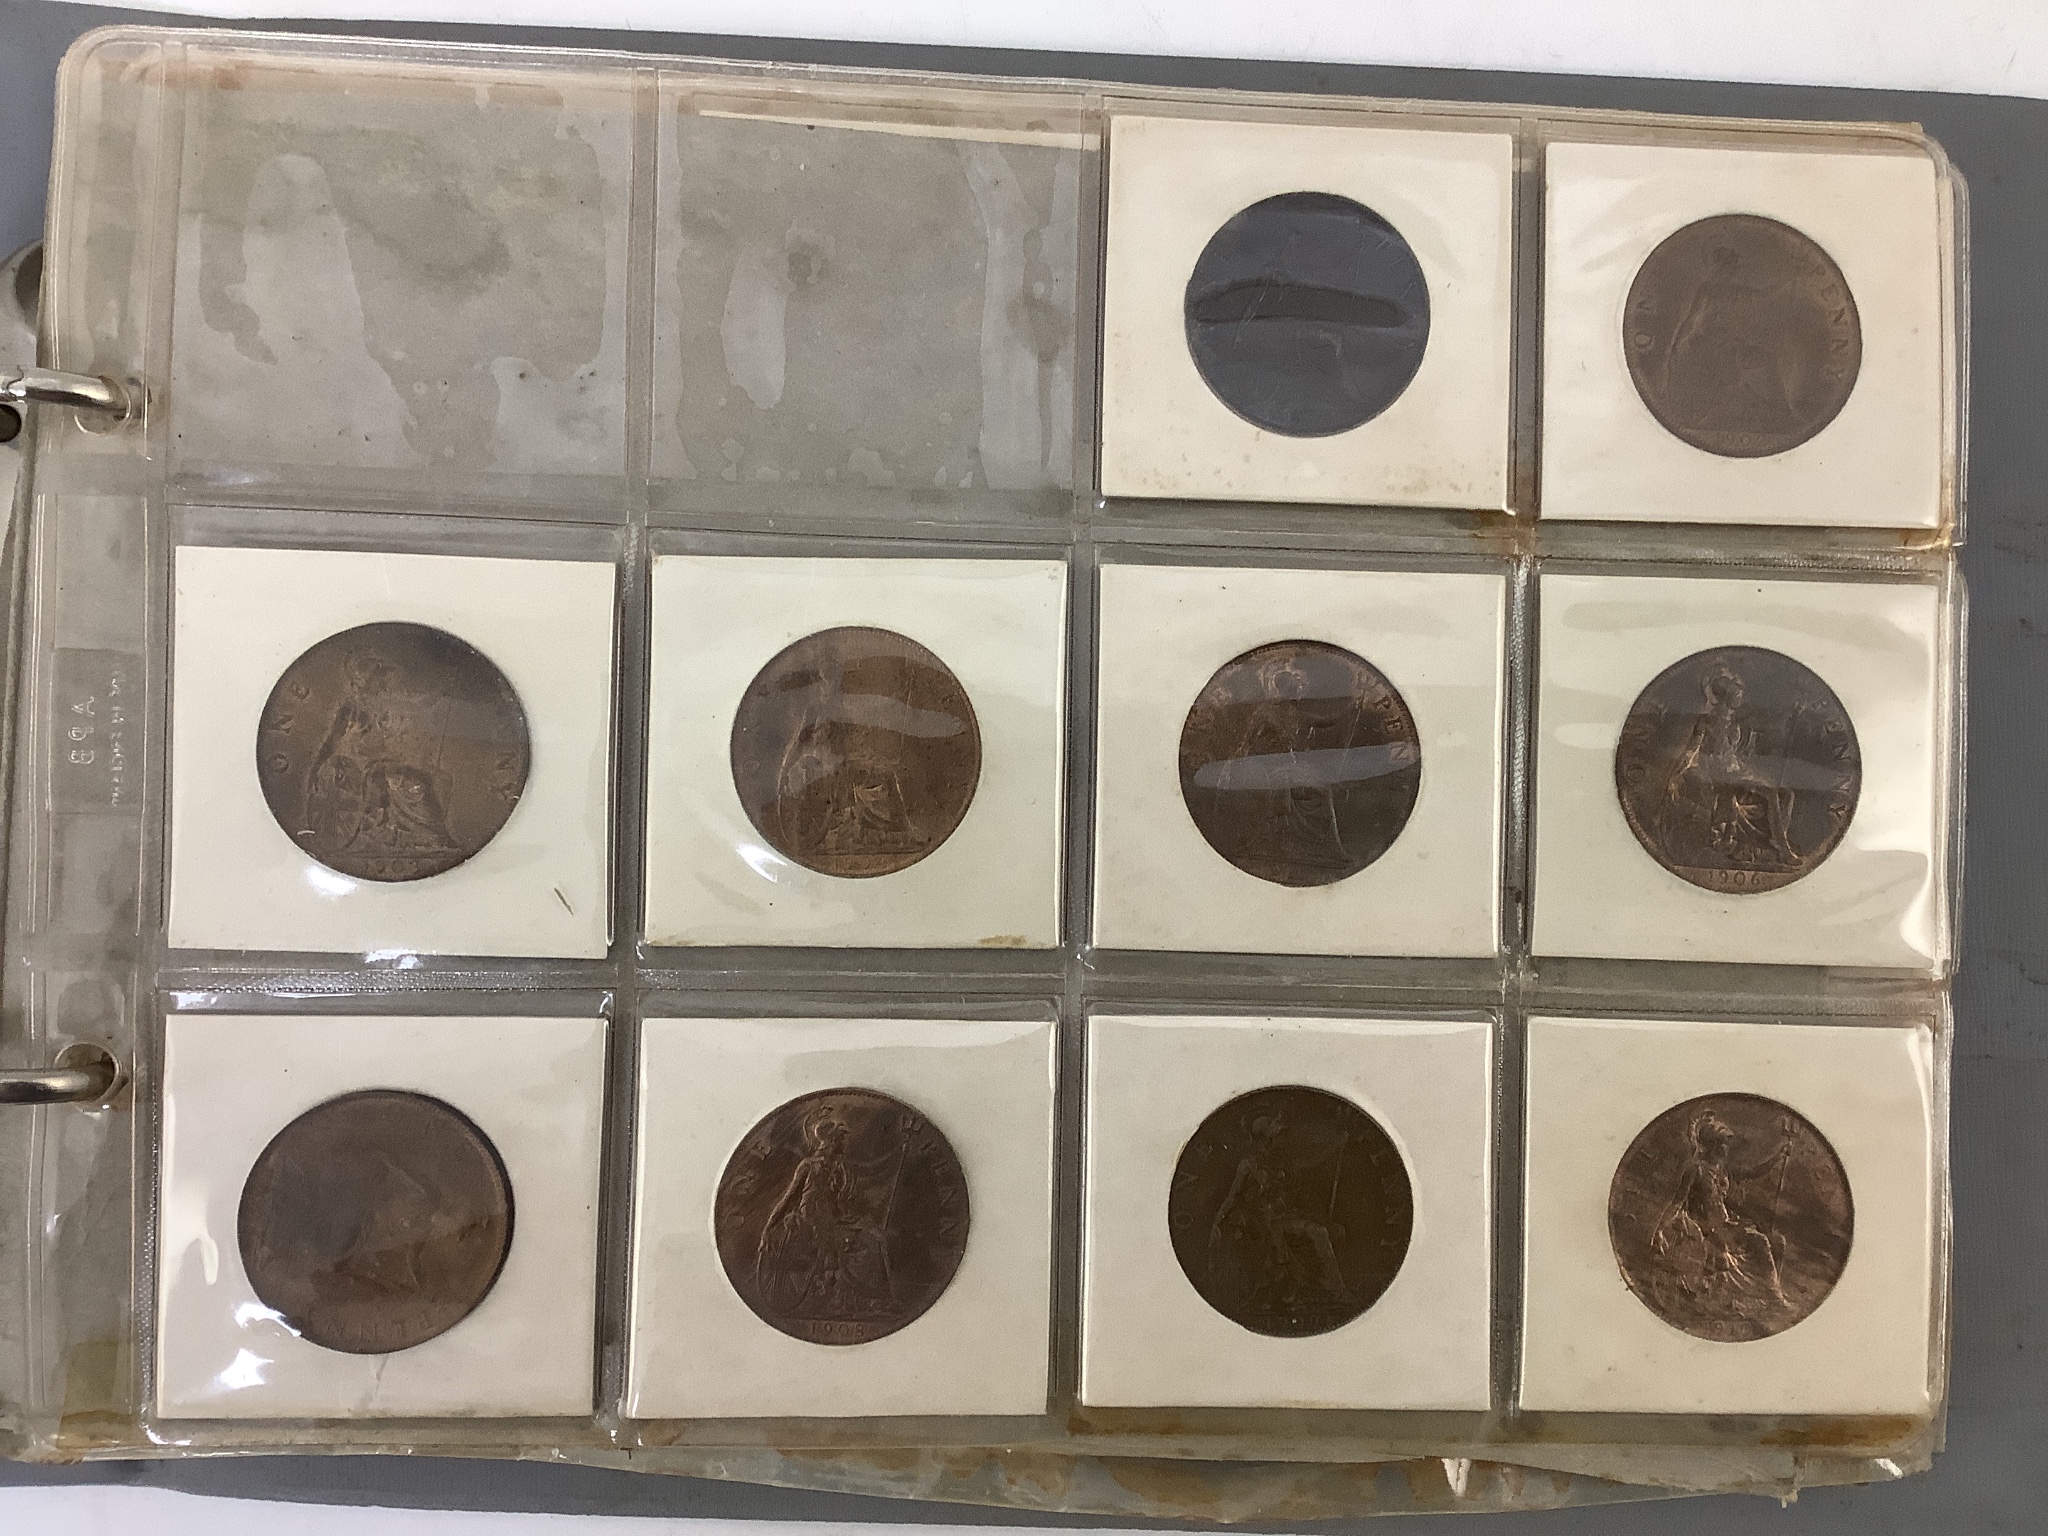 Queen Victoria to Queen Elizabeth II one penny coins, a long run from 1901-1967, the majority good EF to aUNC, including scarce 1904, 1922 and 1926 one pennies, aUNC